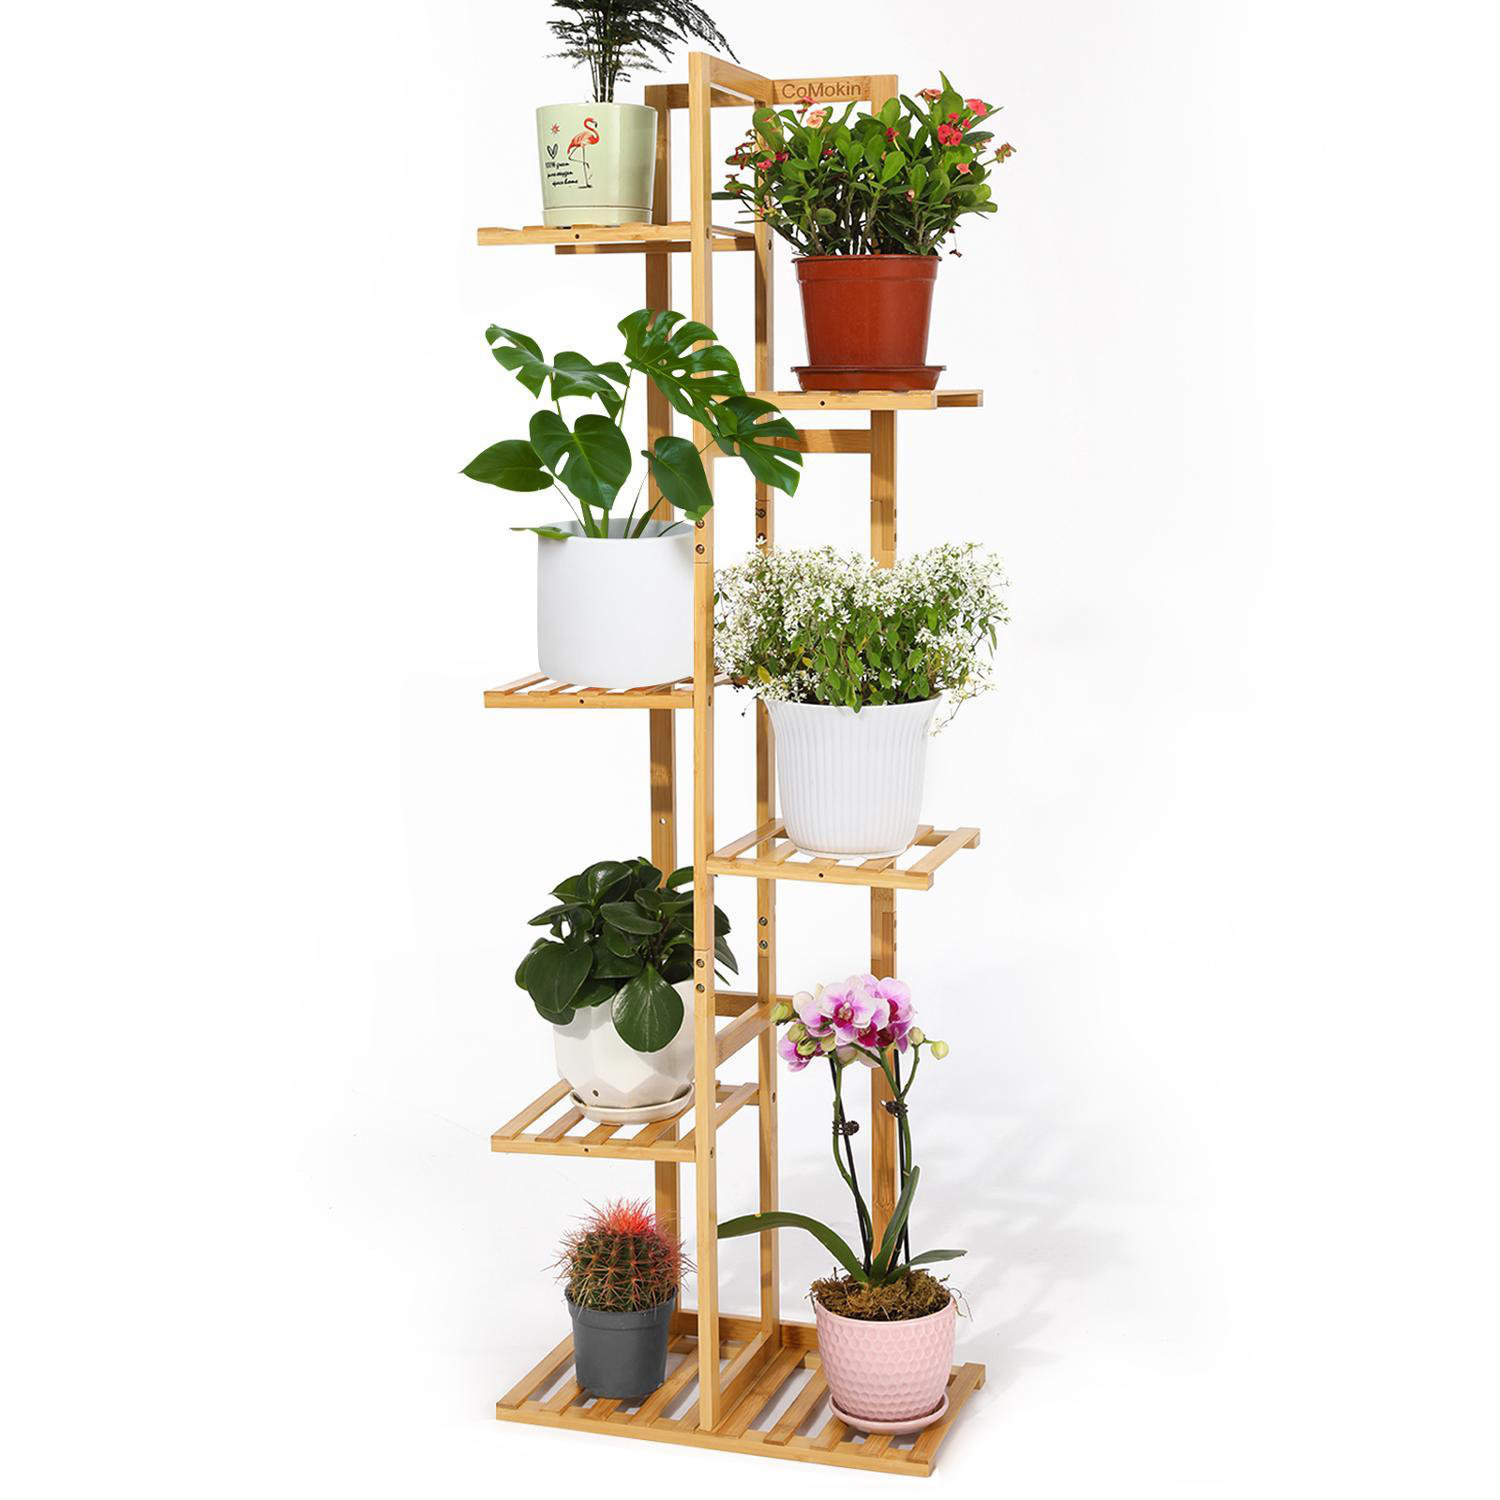 Bamboo 5 Tier 6 Potted Plant Stand Rack Multiple Flower Pot Holder